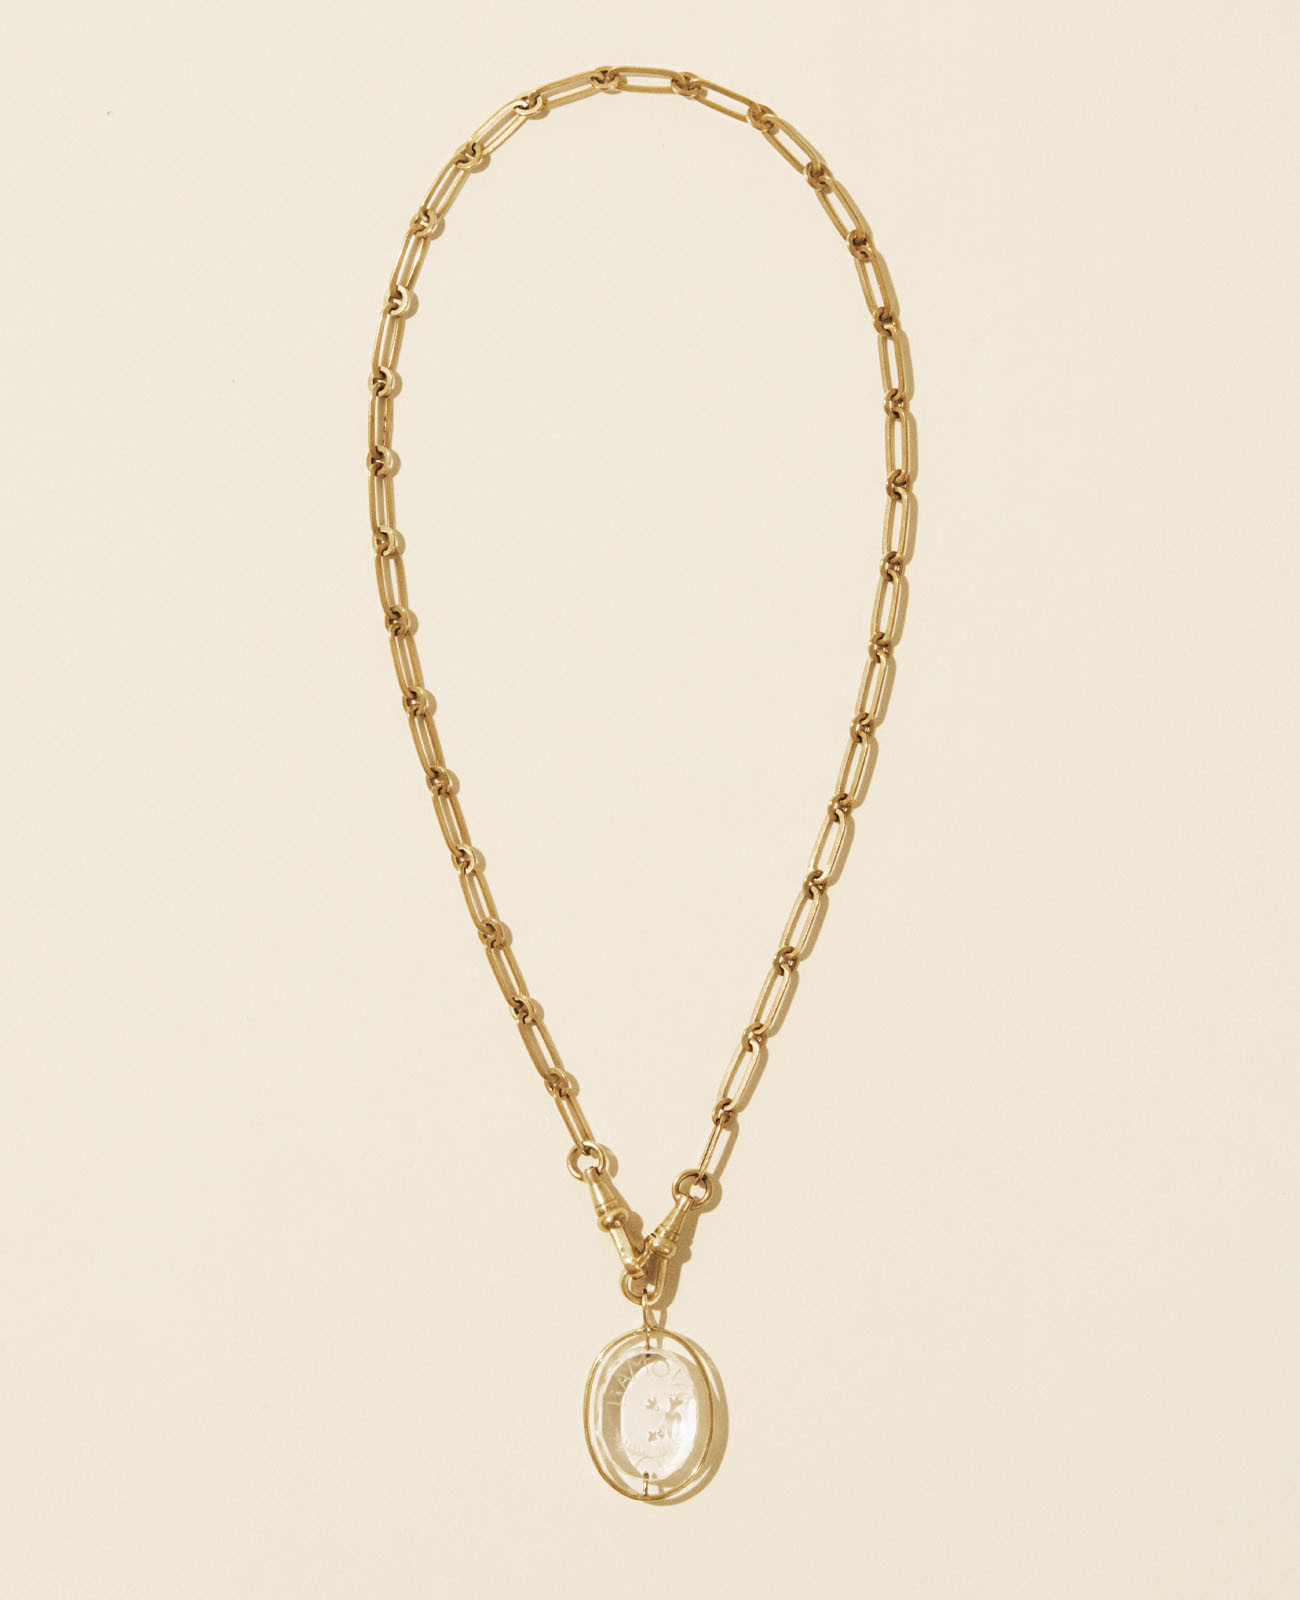 L'AMOUR N°2 CRYSTAL necklace pascale monvoisin jewelry paris